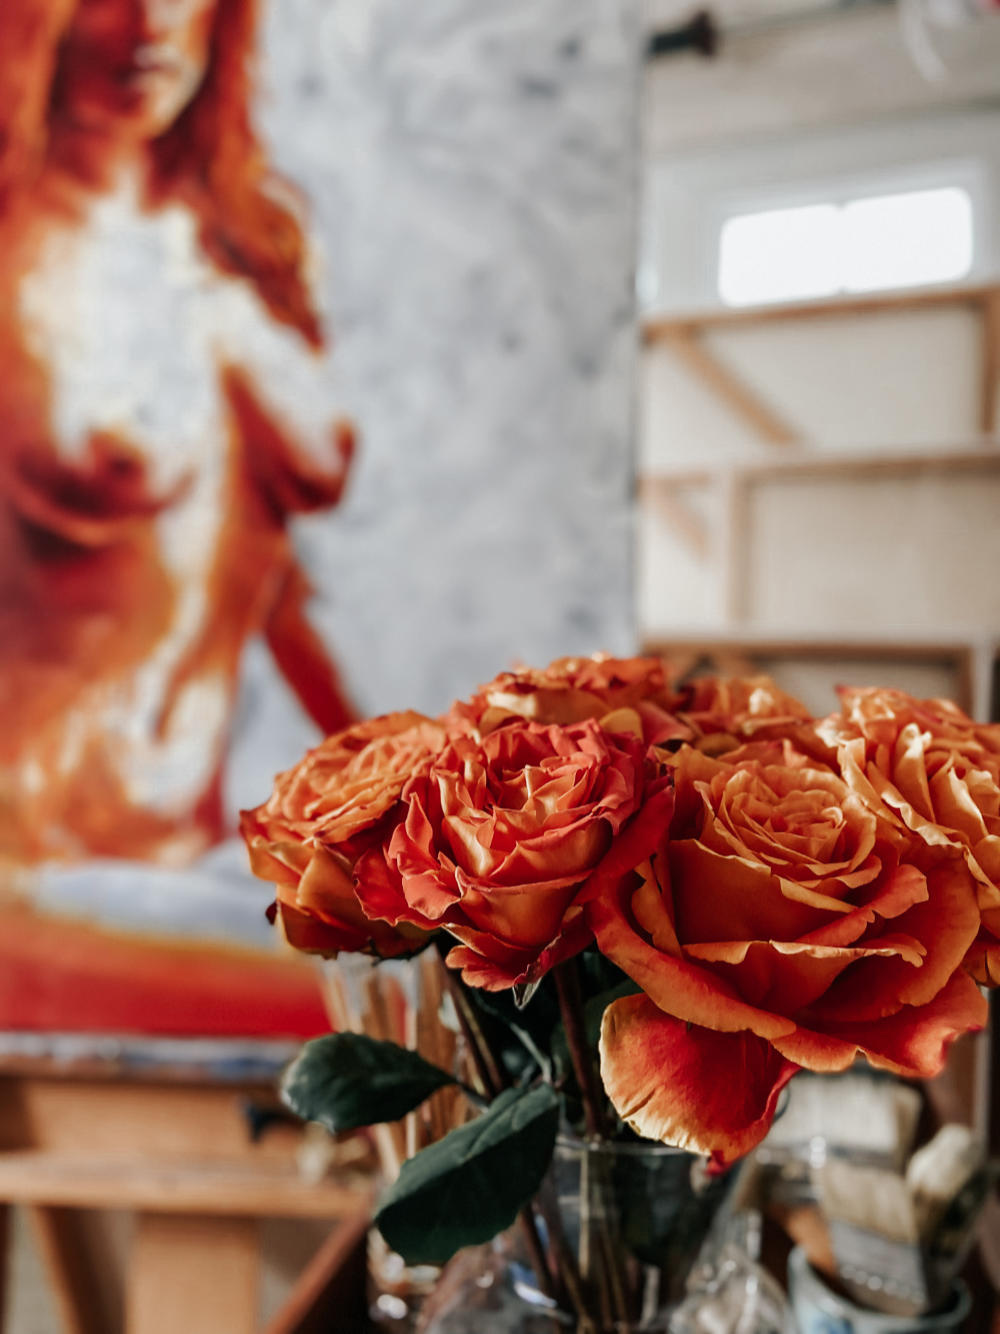 In studio photo of orange roses with painting title "I am ascendant" in background